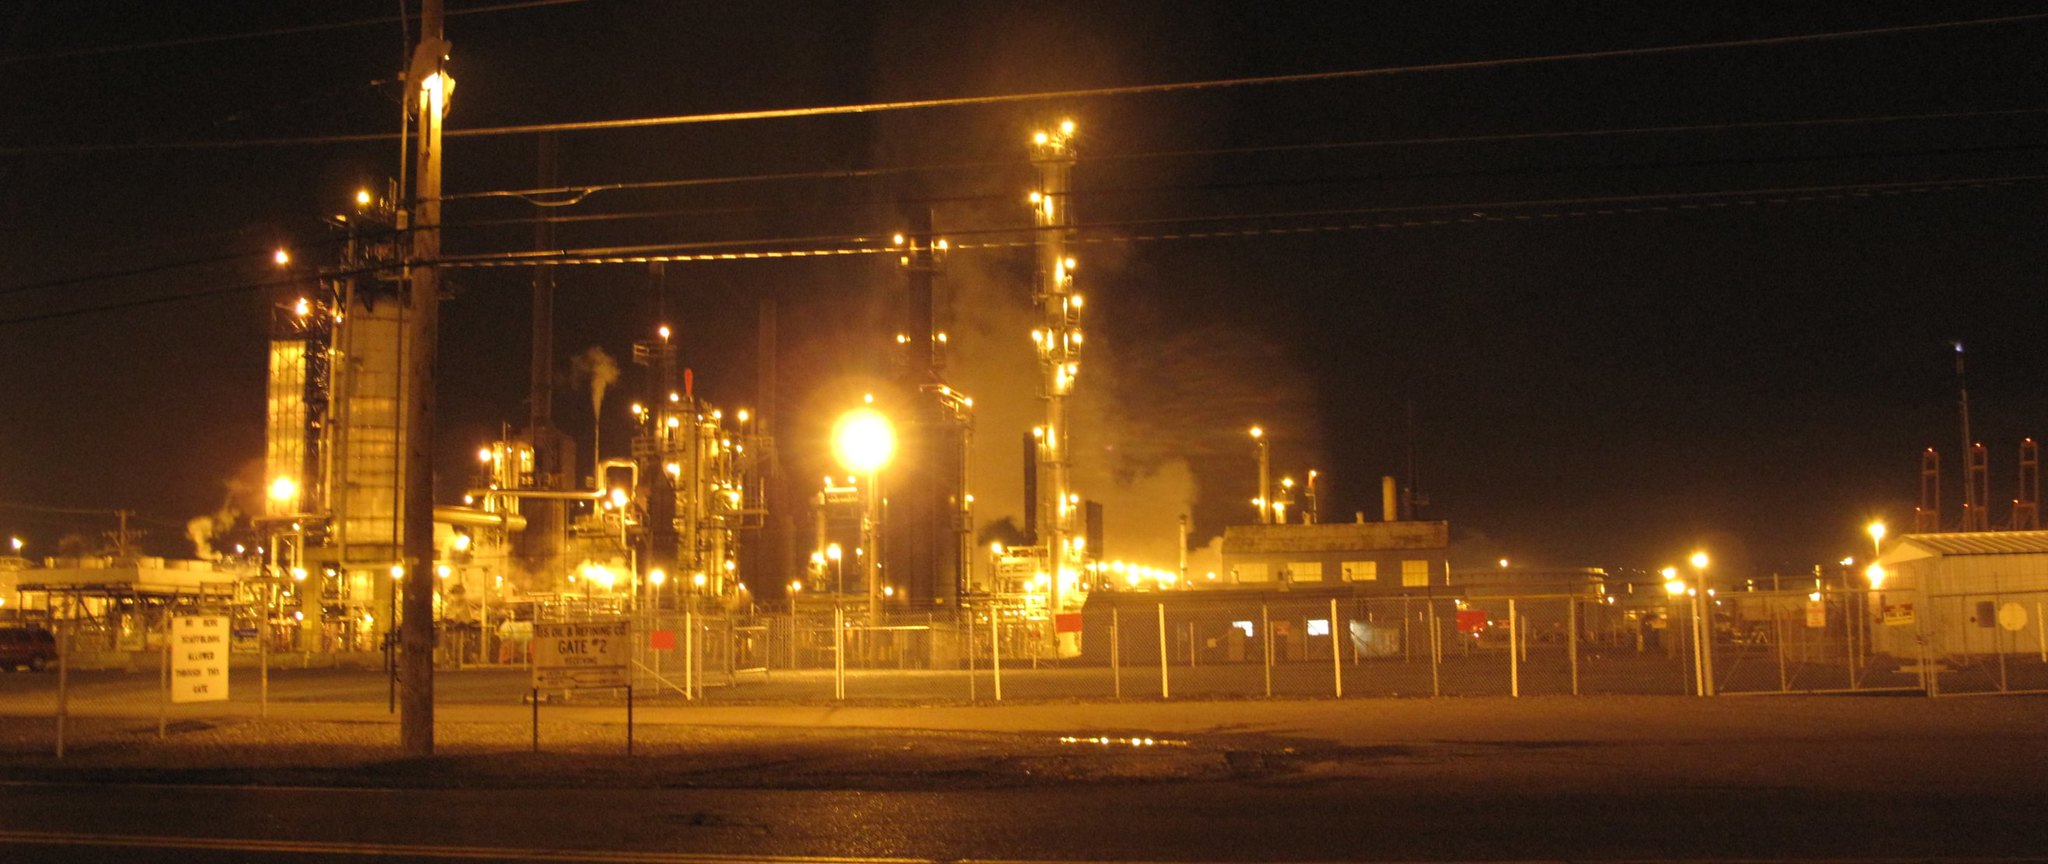 Nighttime image of US Oil Refinery in Tacoma